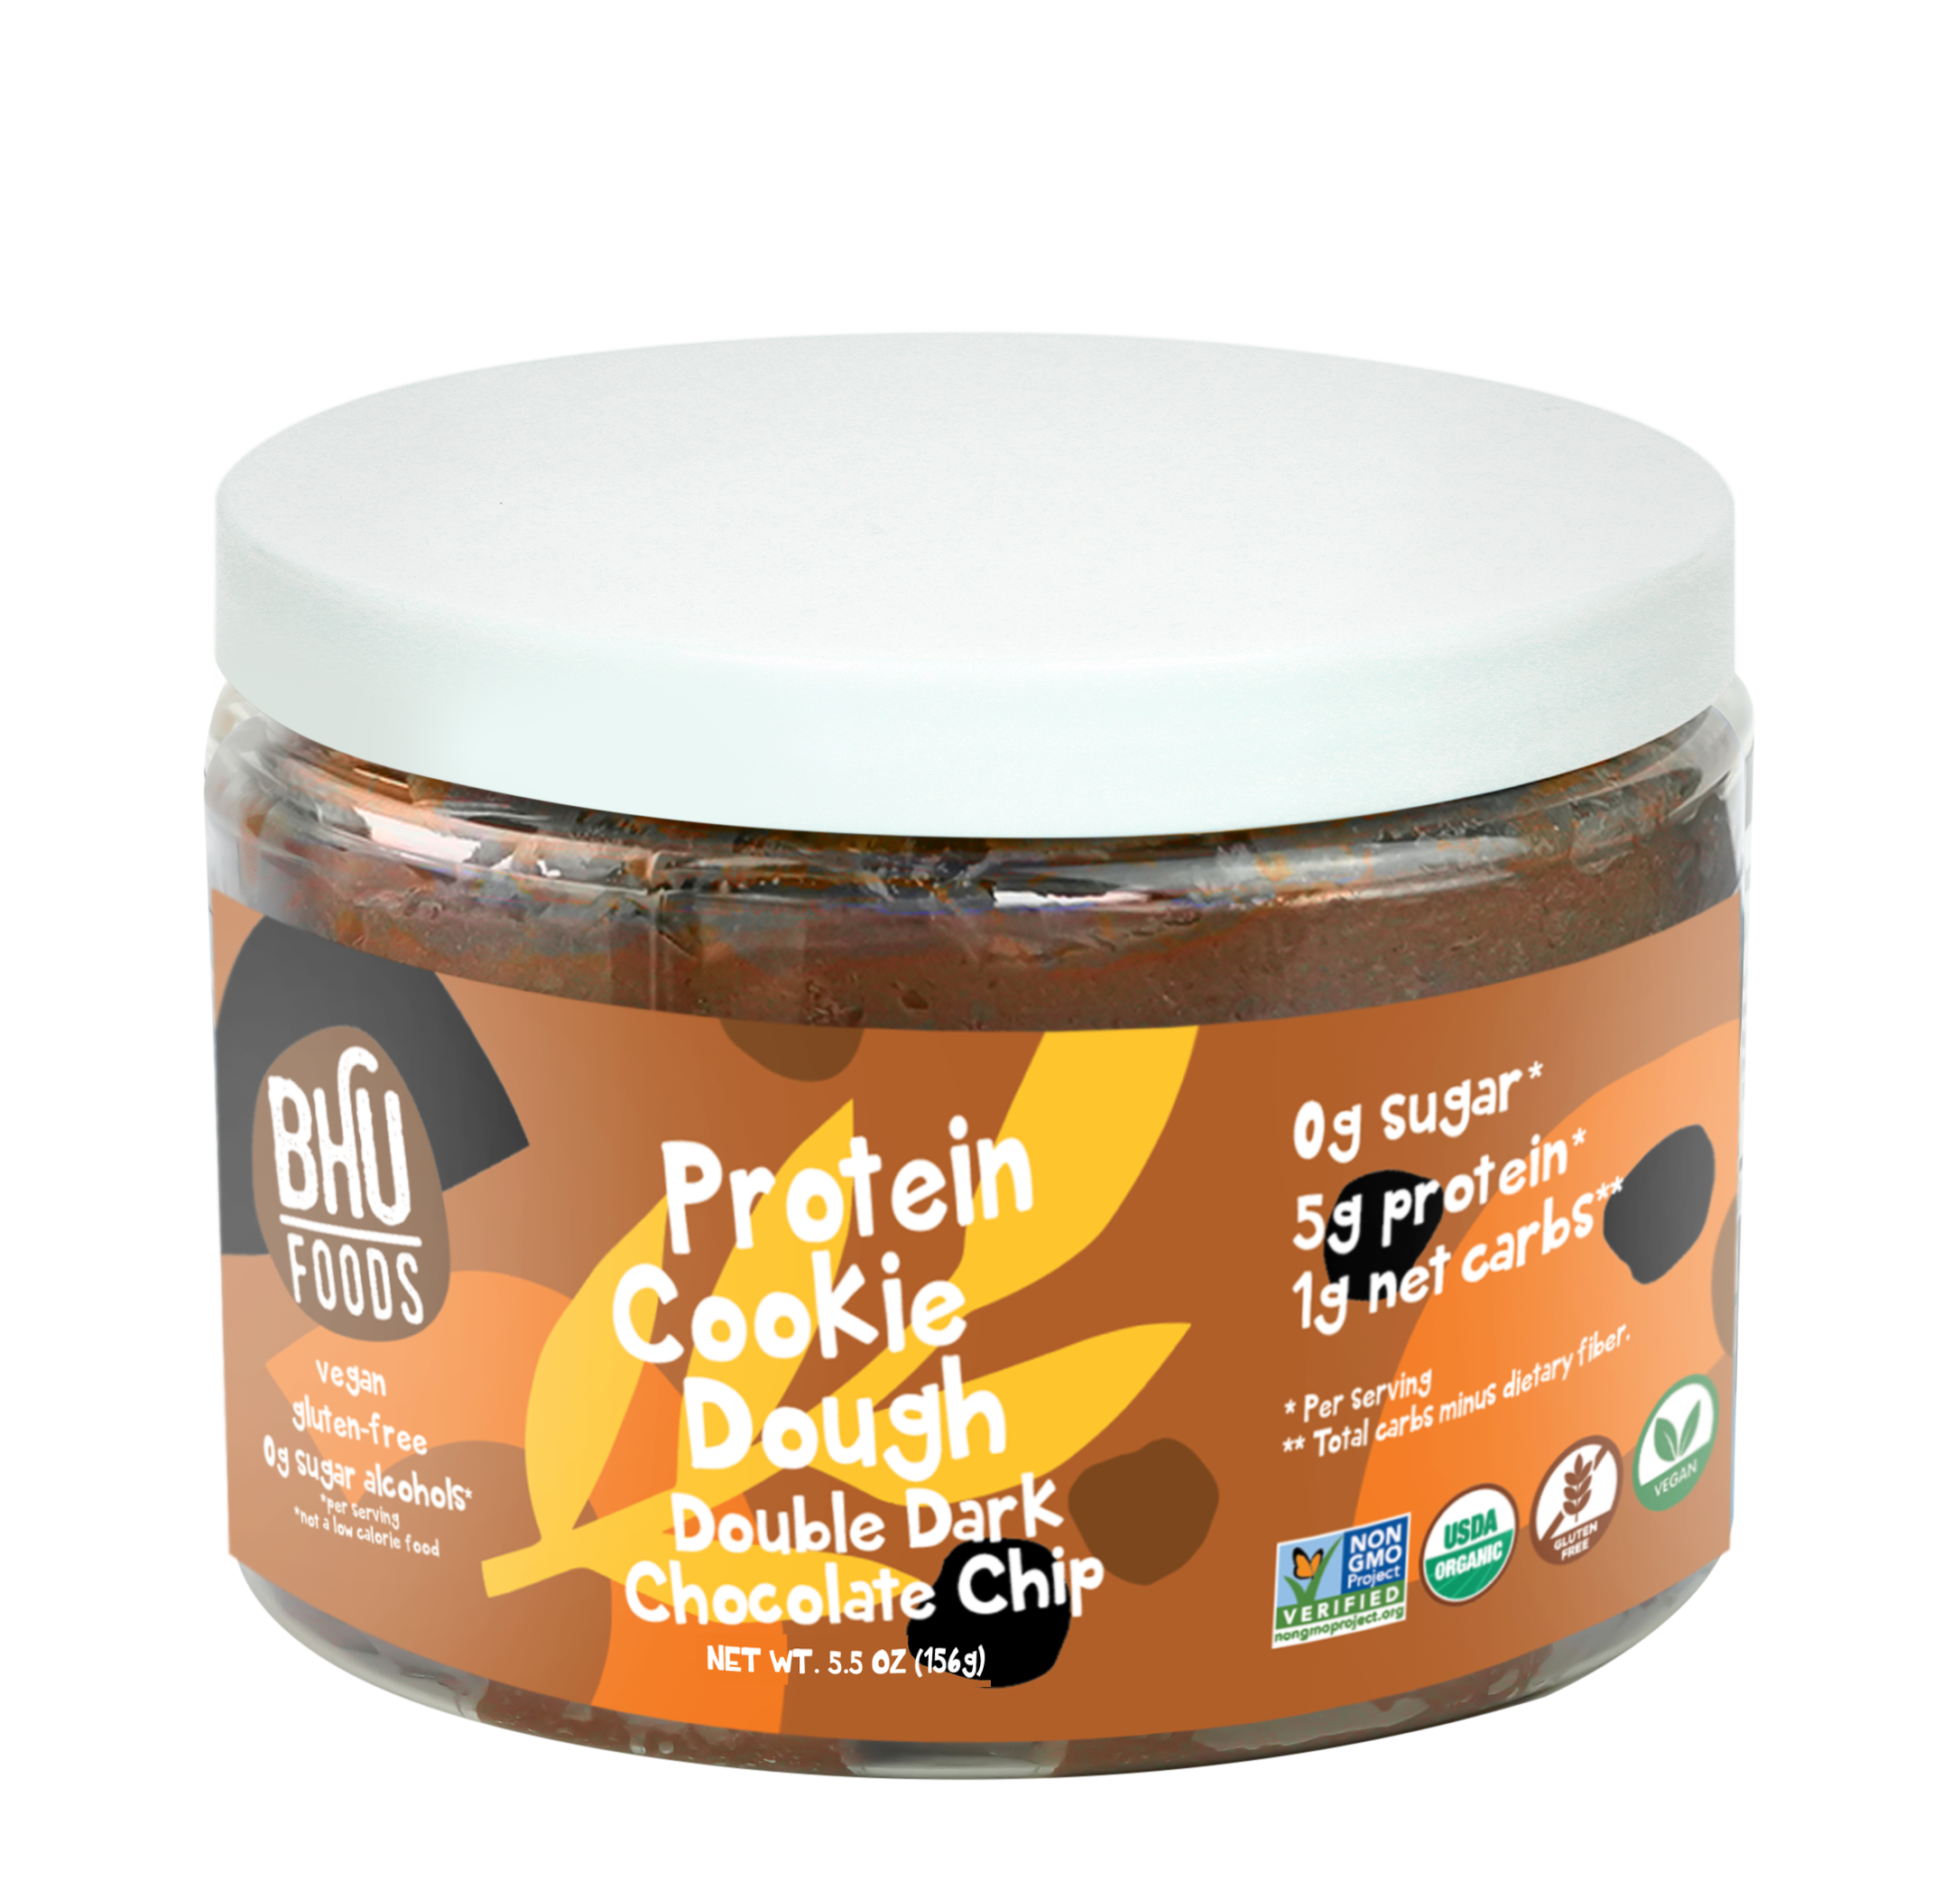 BHU Foods Protein Cookie Dough - Double Dark Chocolate Chip 6 units per case 5.5 oz